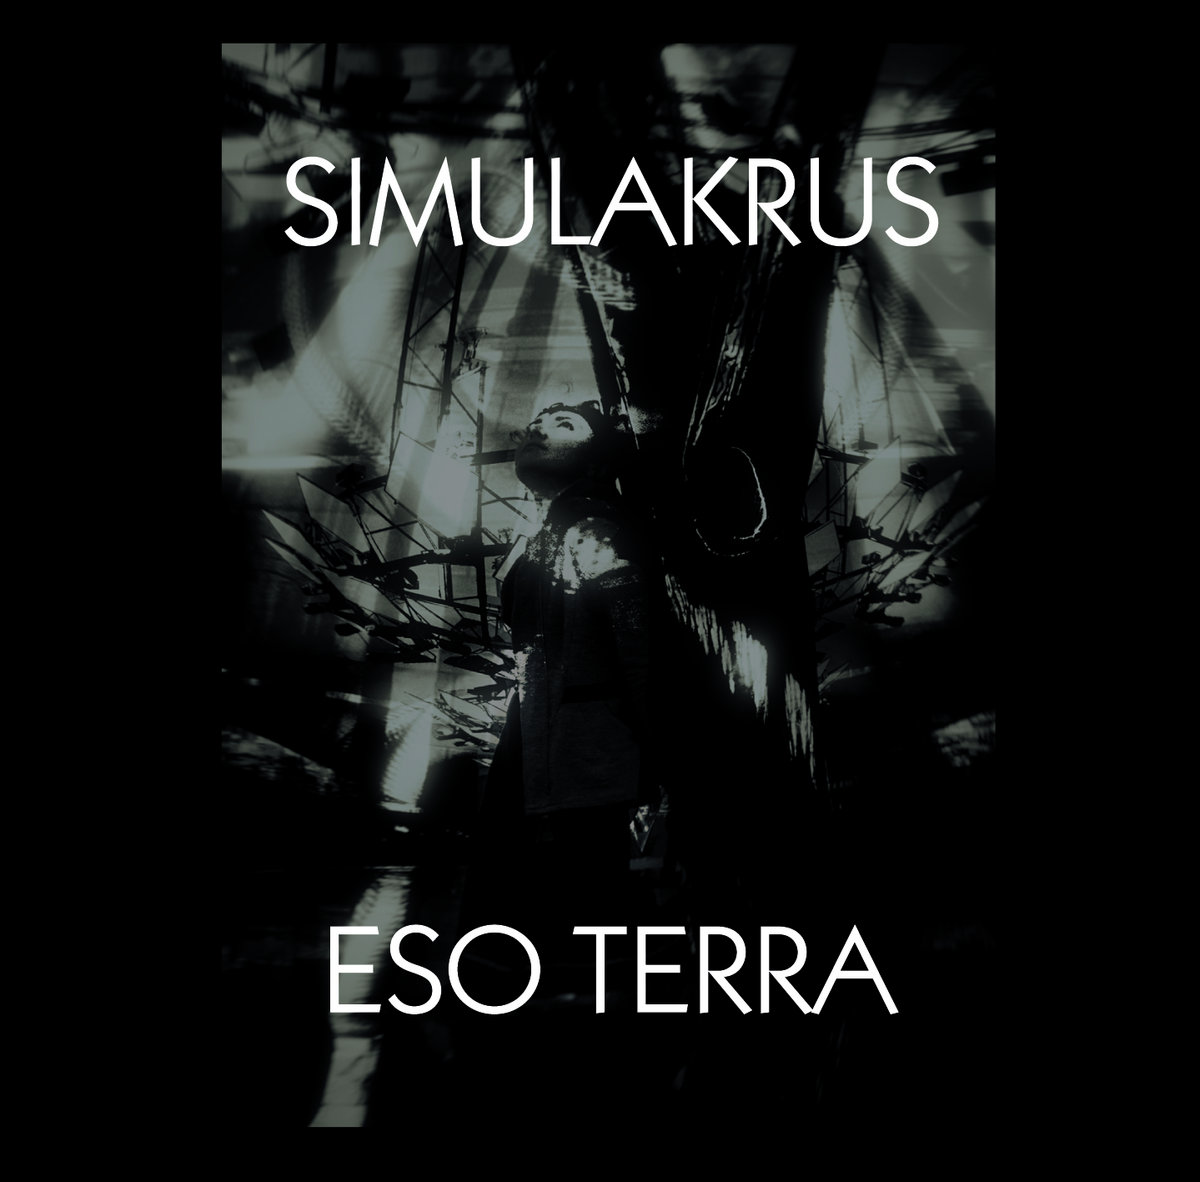 You are currently viewing Новый релиз Simulakrus – Eso terra